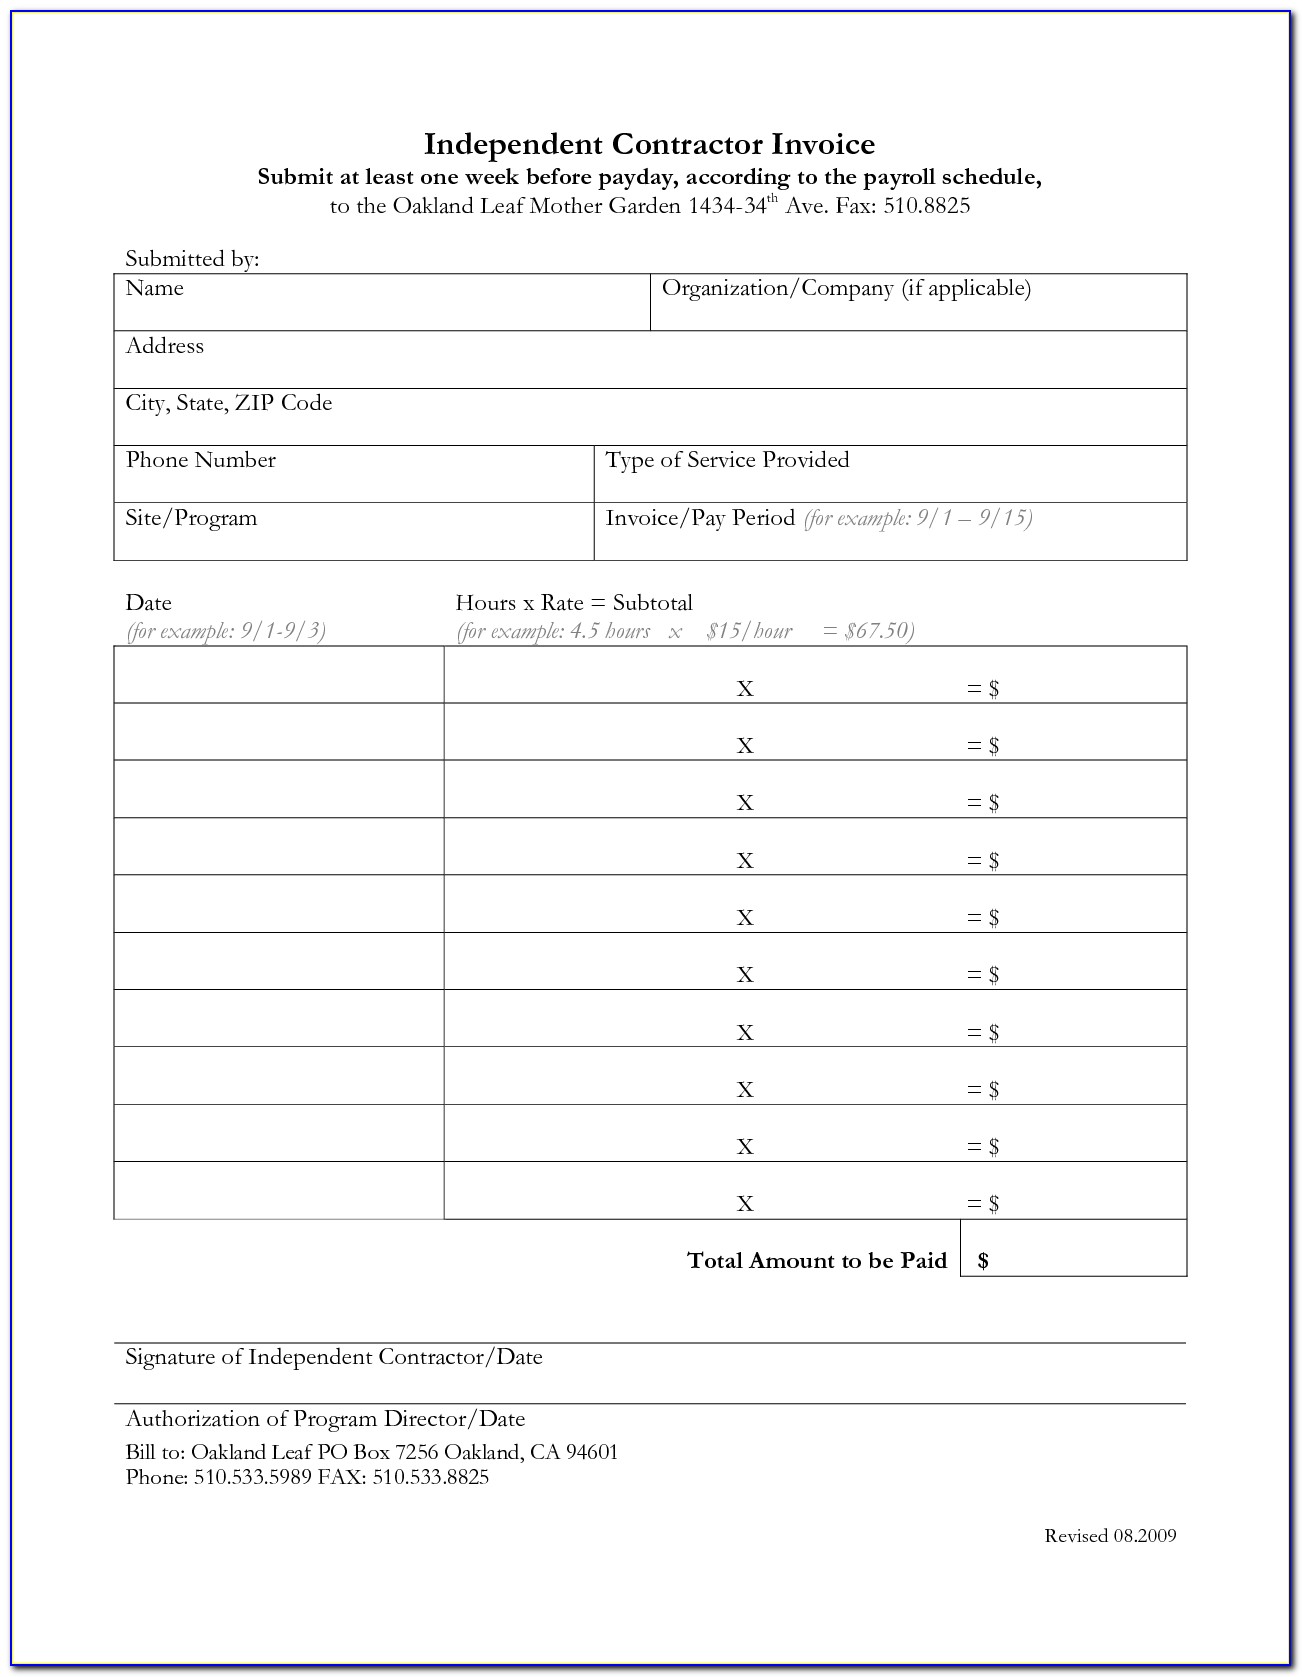 Independent Contractor Invoice Example